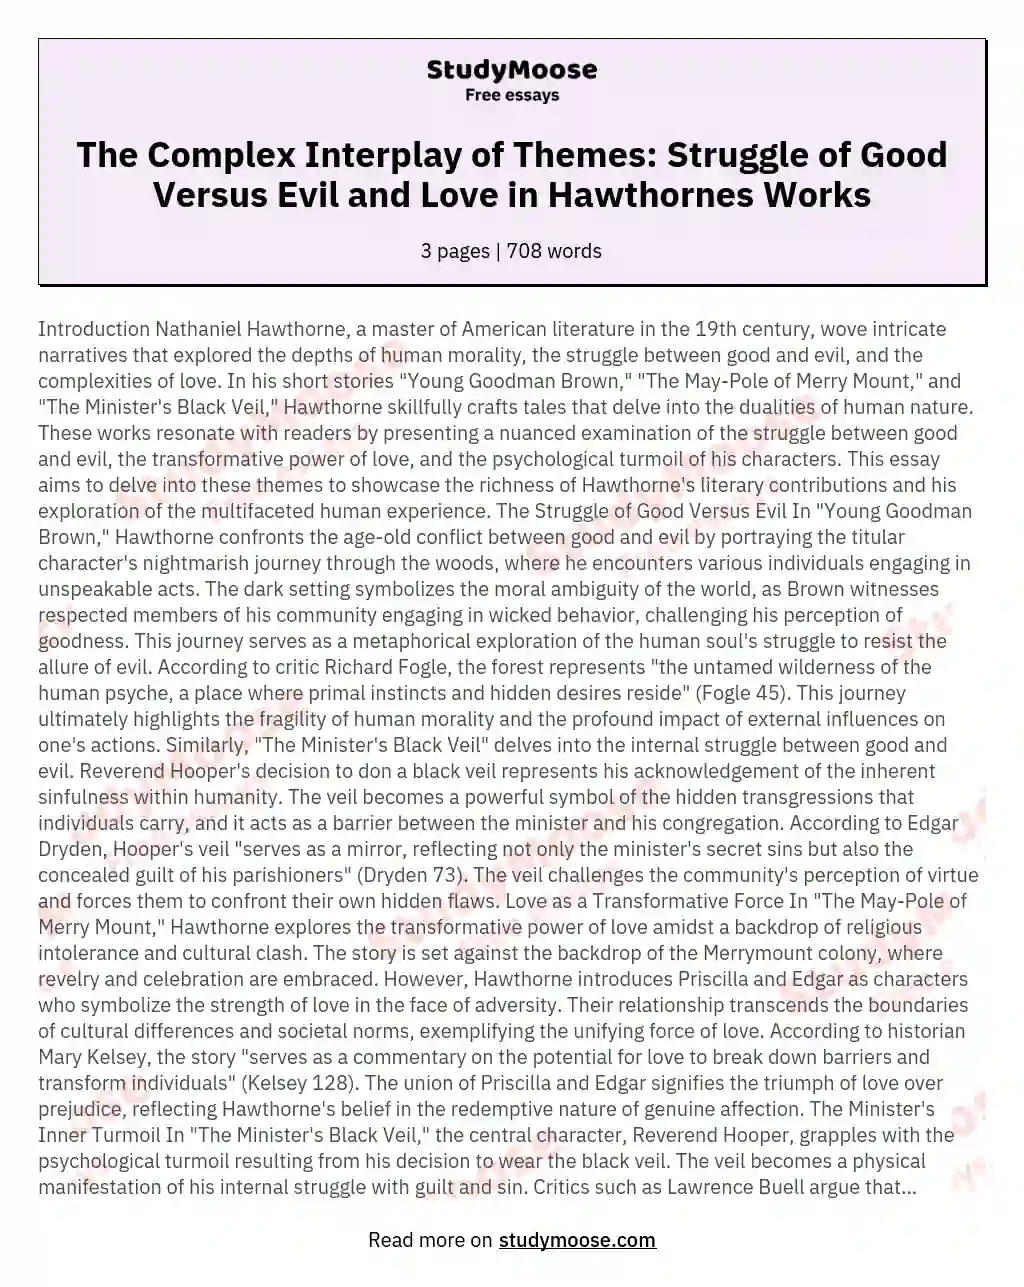 The Complex Interplay of Themes: Struggle of Good Versus Evil and Love in Hawthornes Works essay